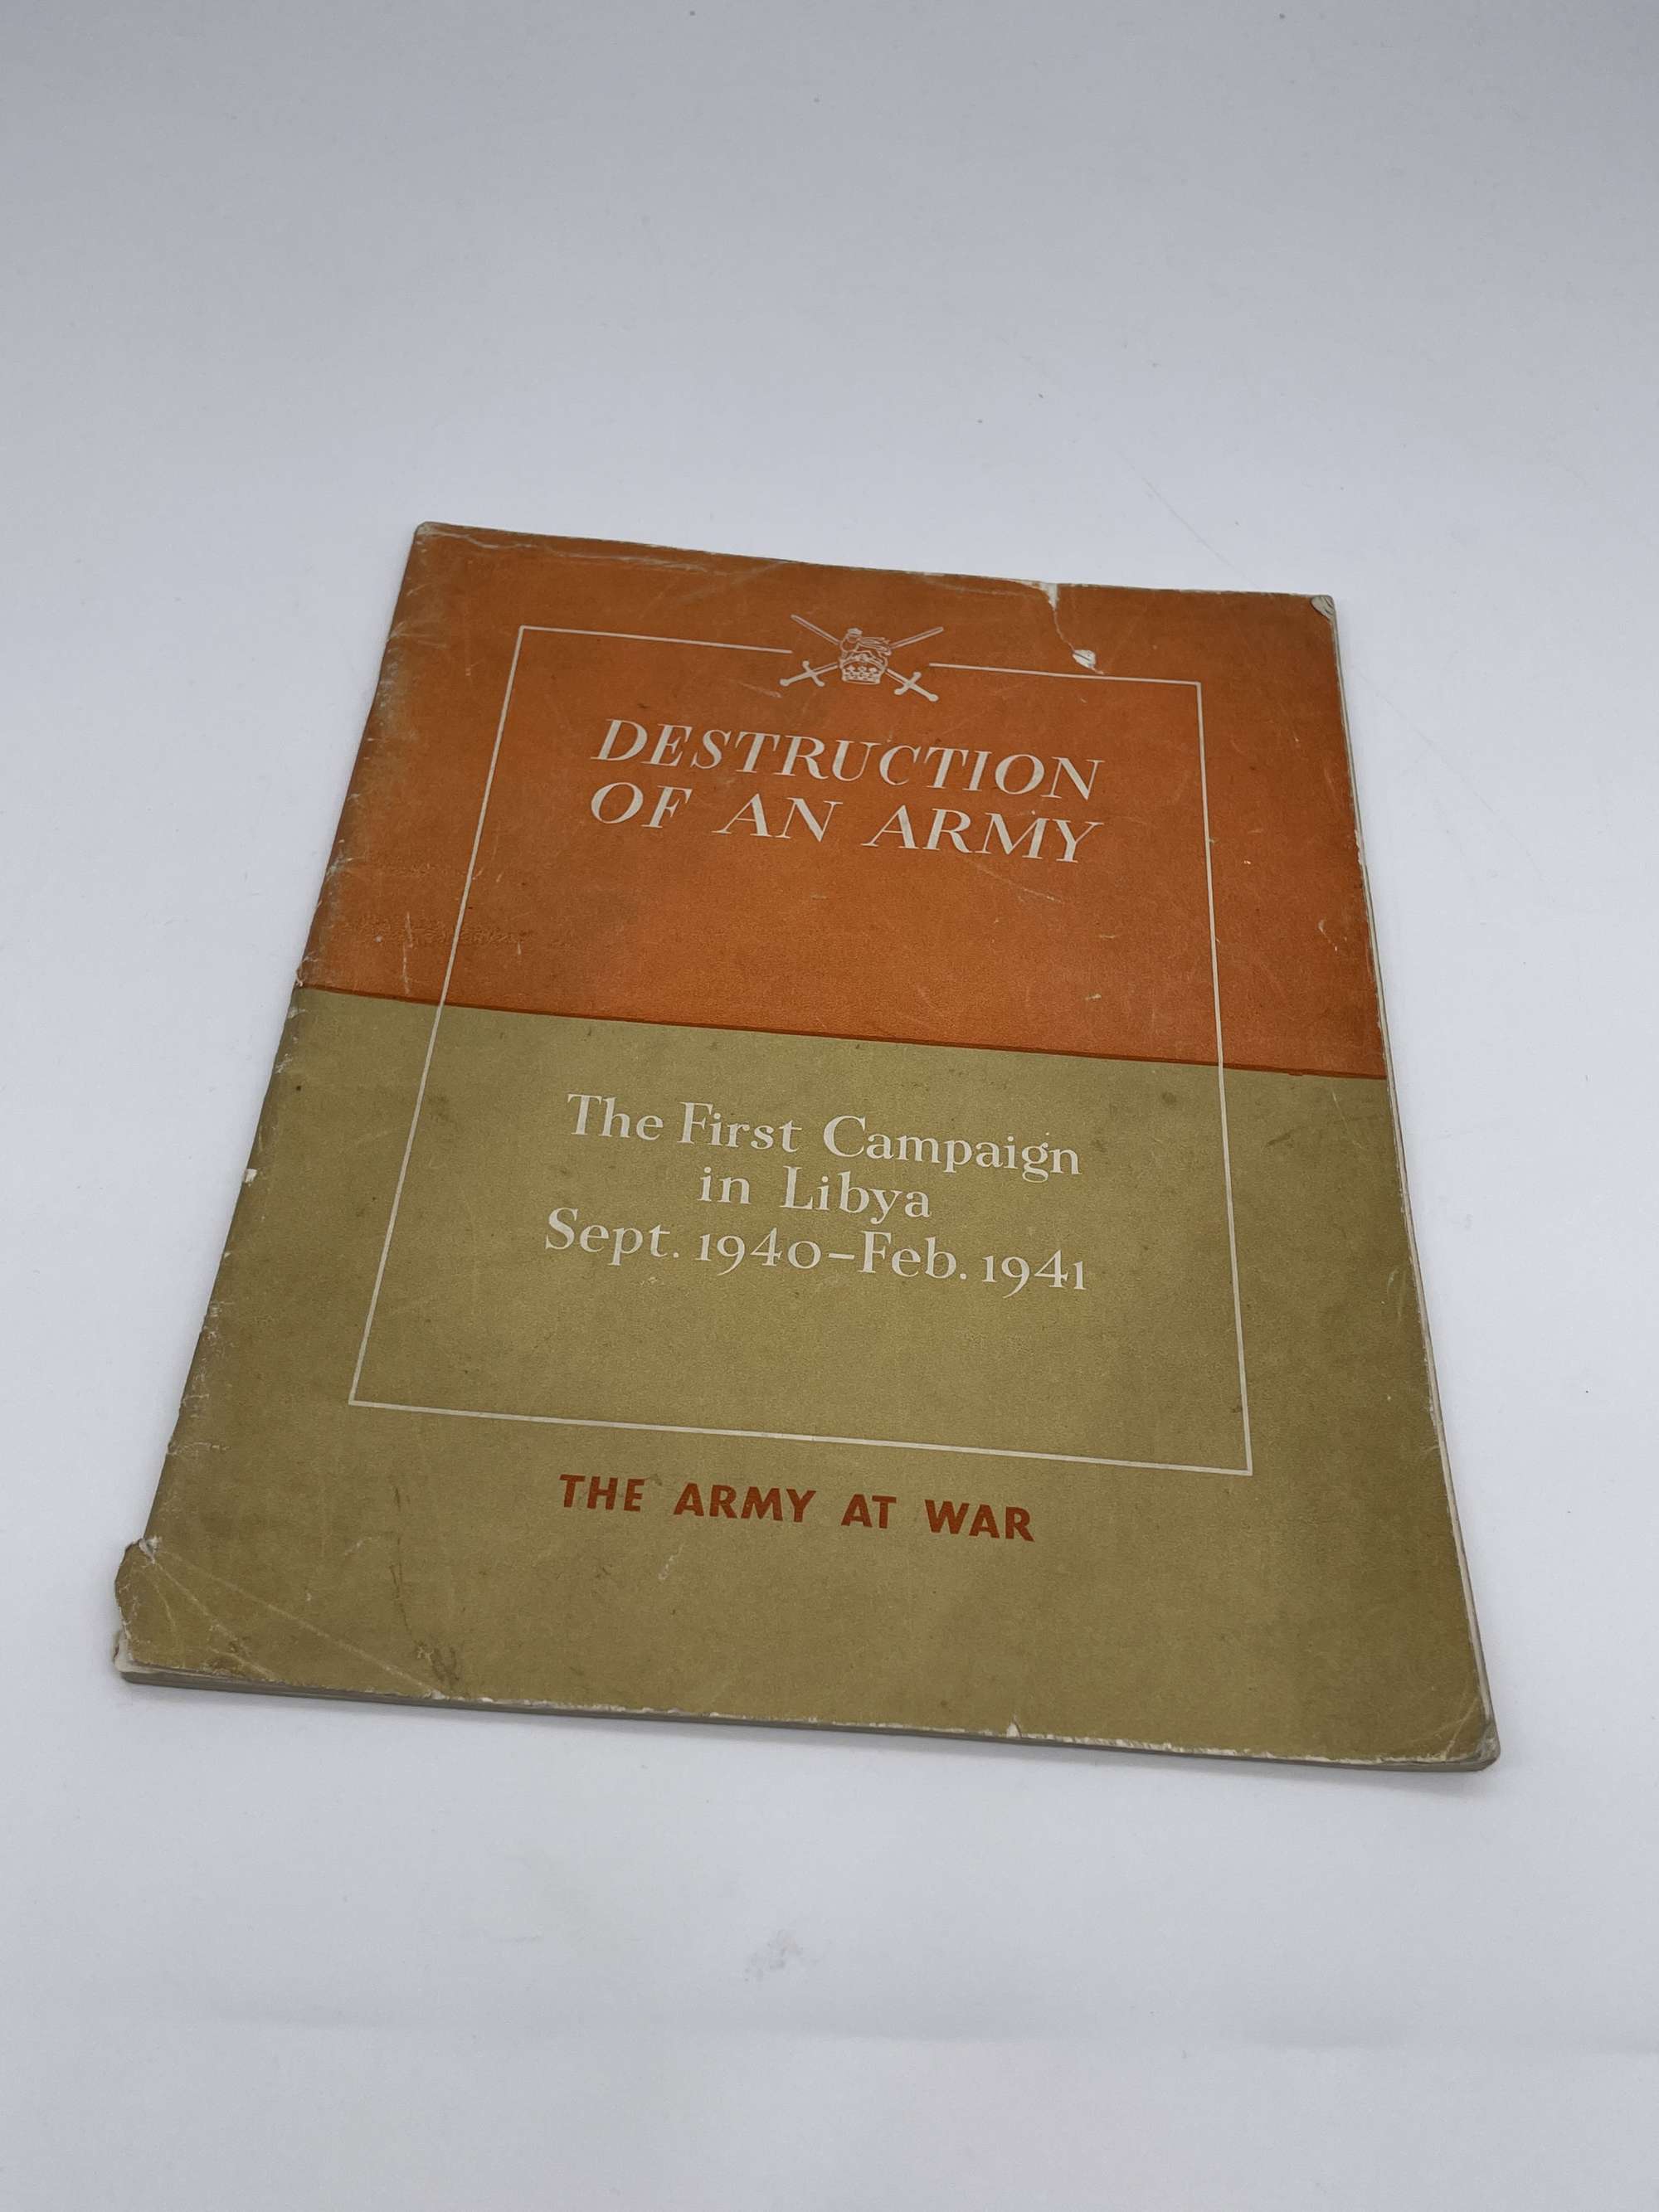 Original 1941 Dated Book, Destruction Of An Army, The Libya Campaign Sept 40 to Feb 41